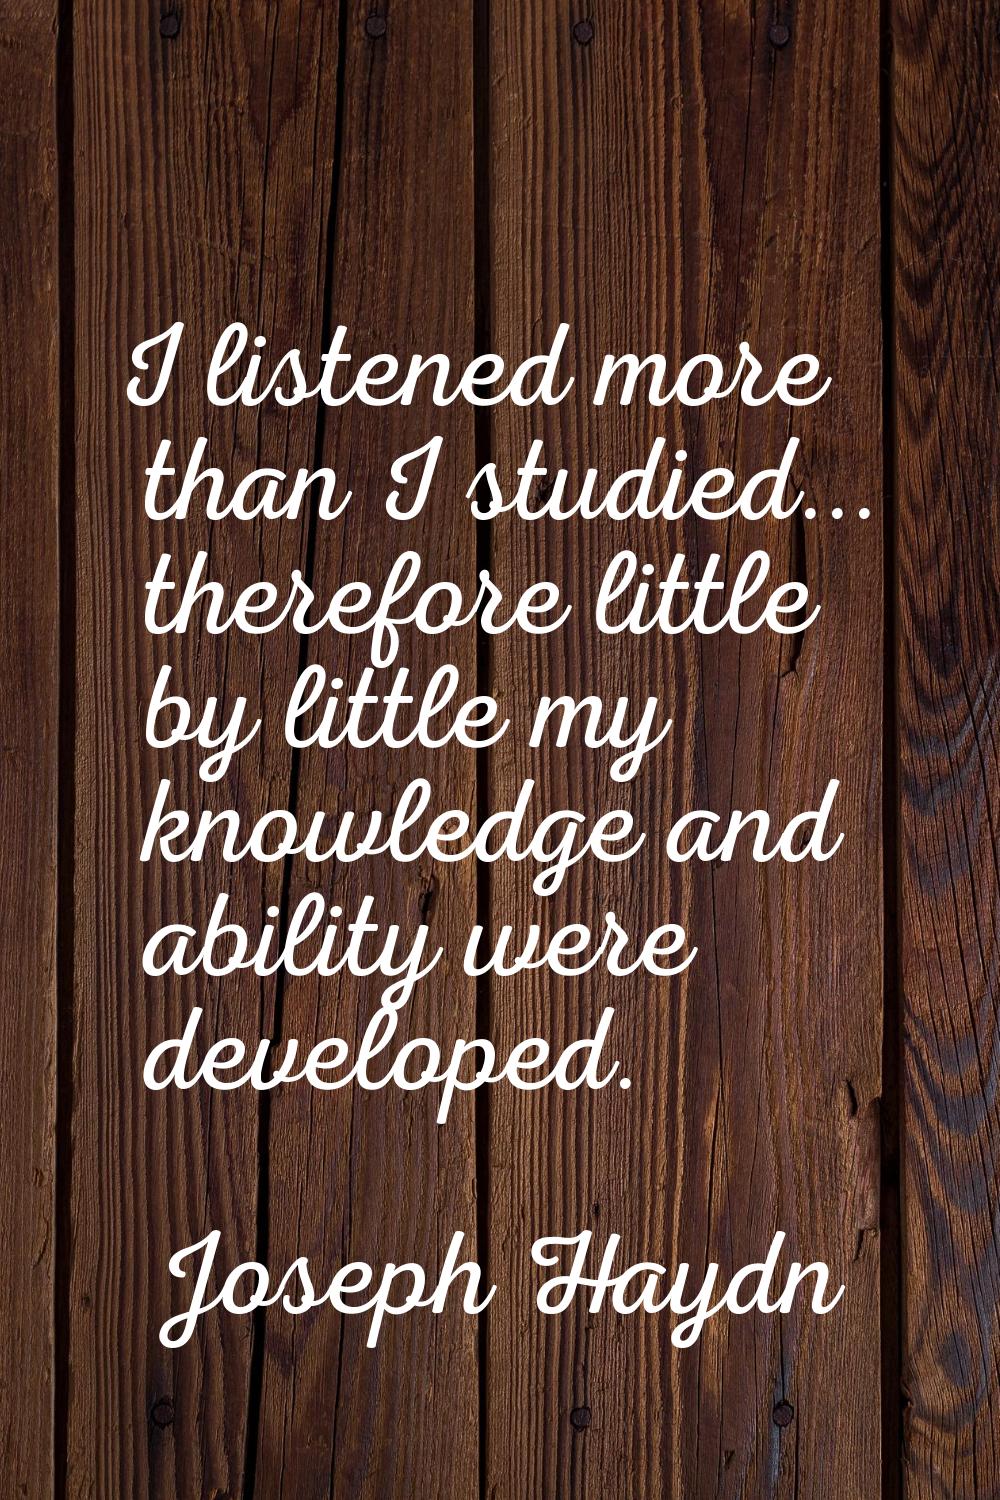 I listened more than I studied... therefore little by little my knowledge and ability were develope